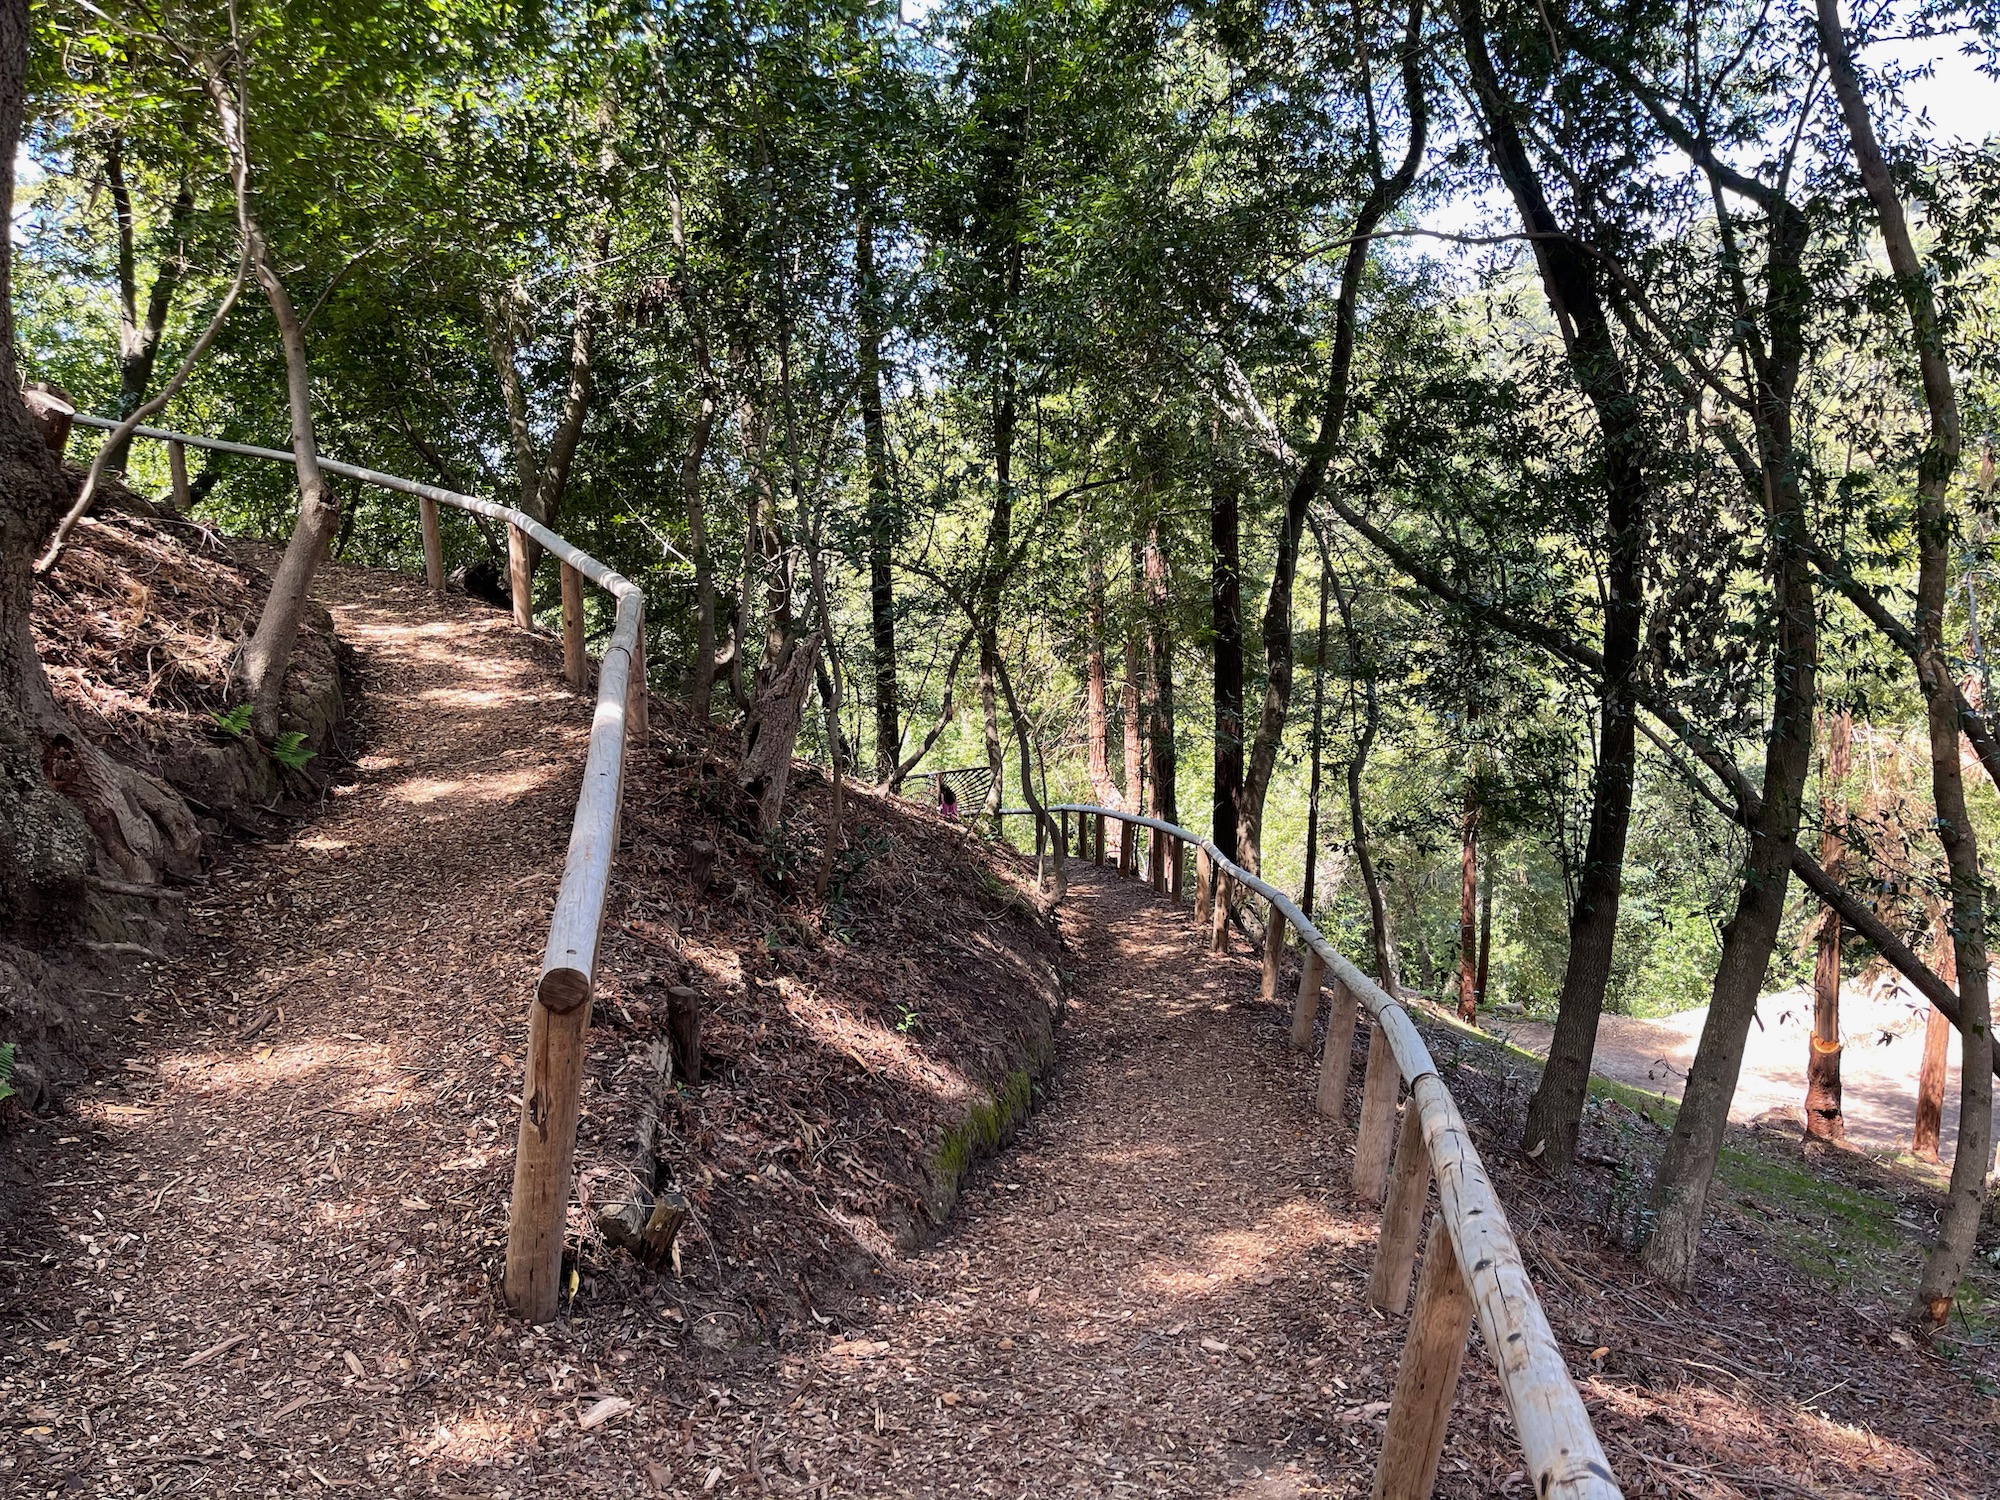 a wooden railings on a trail in a forest